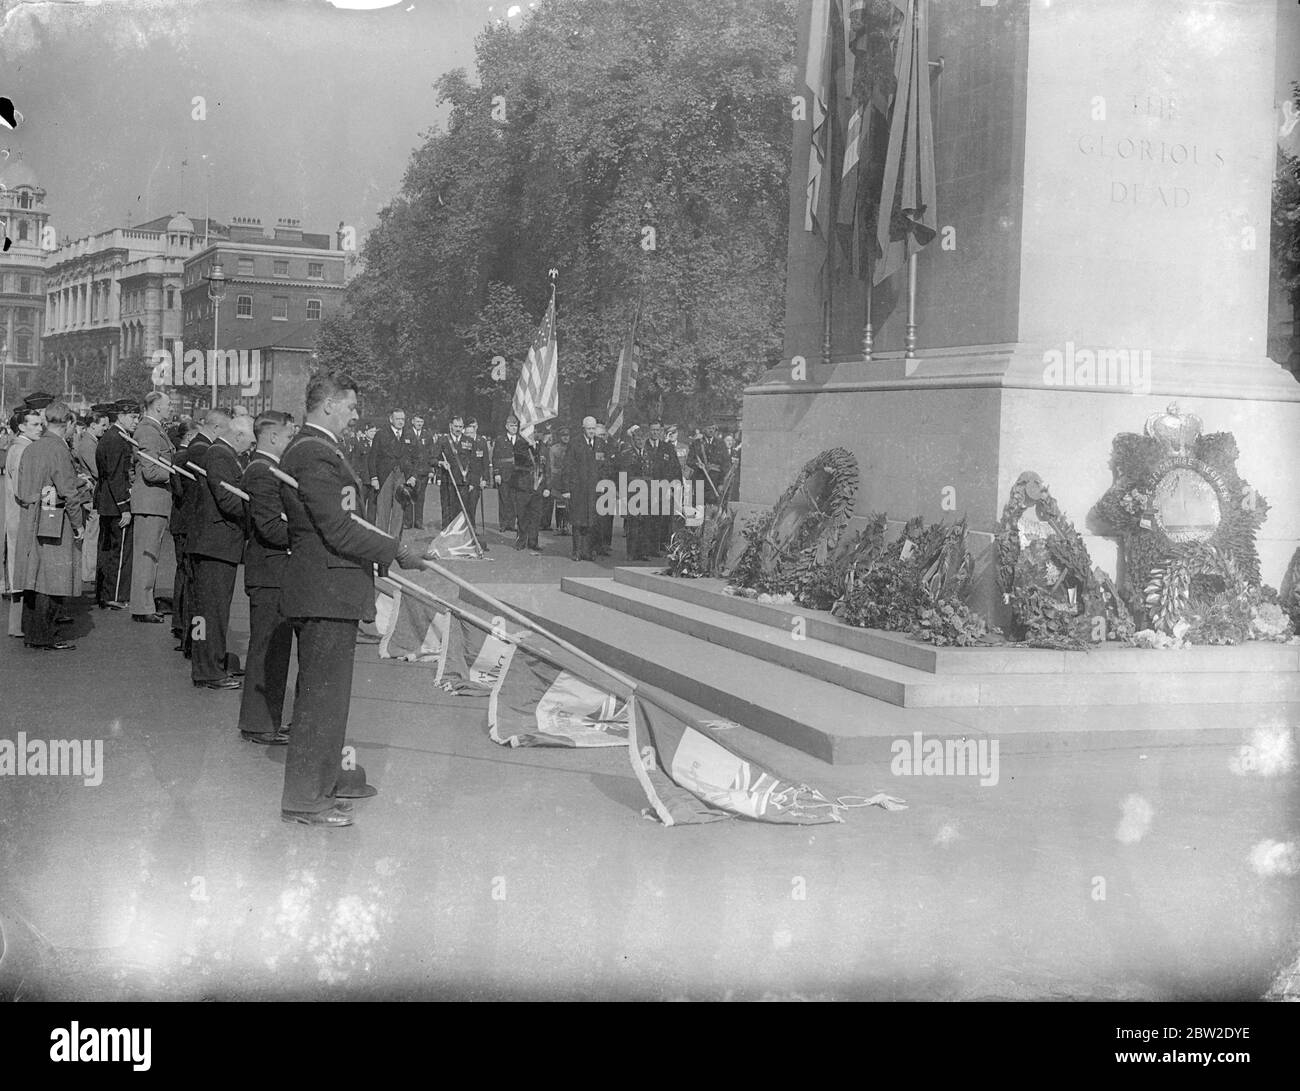 Returning from their tour of the great war battlefields, members of the special national commanders party of American Legion paraded at the Cenotaph in Whitehall and placed a wreath. Flags of the American Legion dipped in salute at the Cenotaph. 10 October 1937. Stock Photo